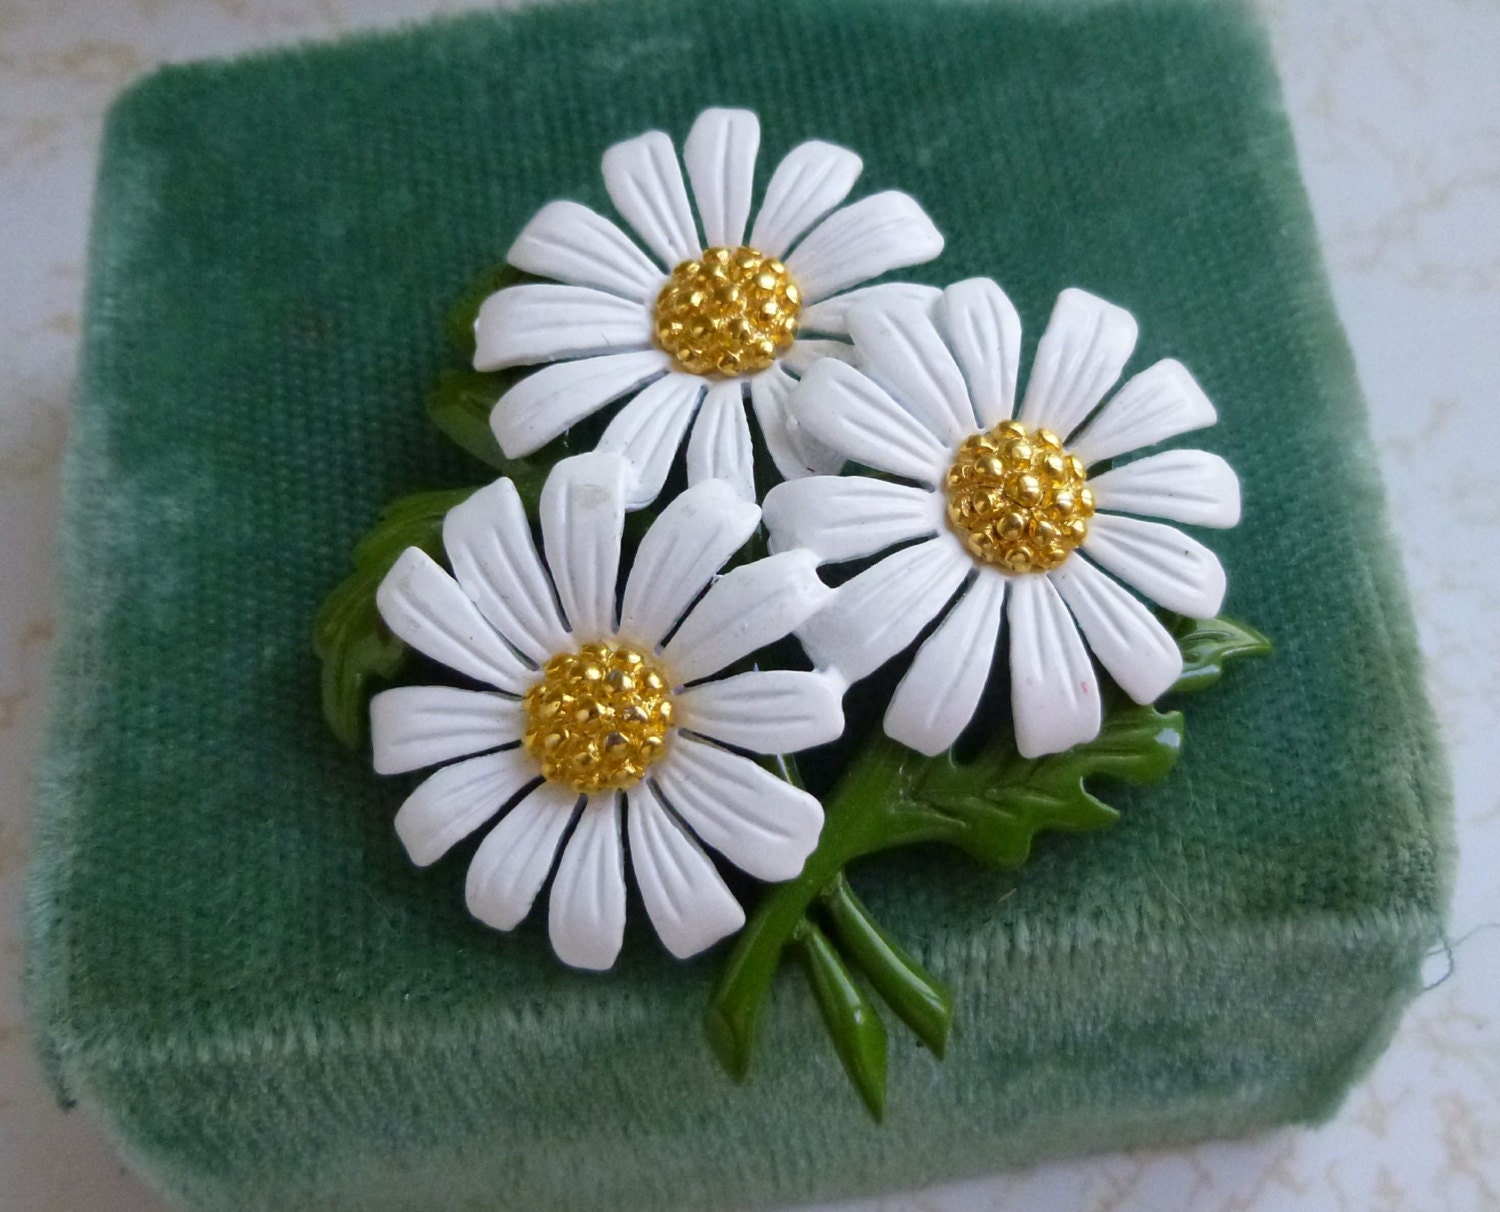 Vintage Enameled Metal Daisy Pin Flower Brooch by Crybabe on Etsy